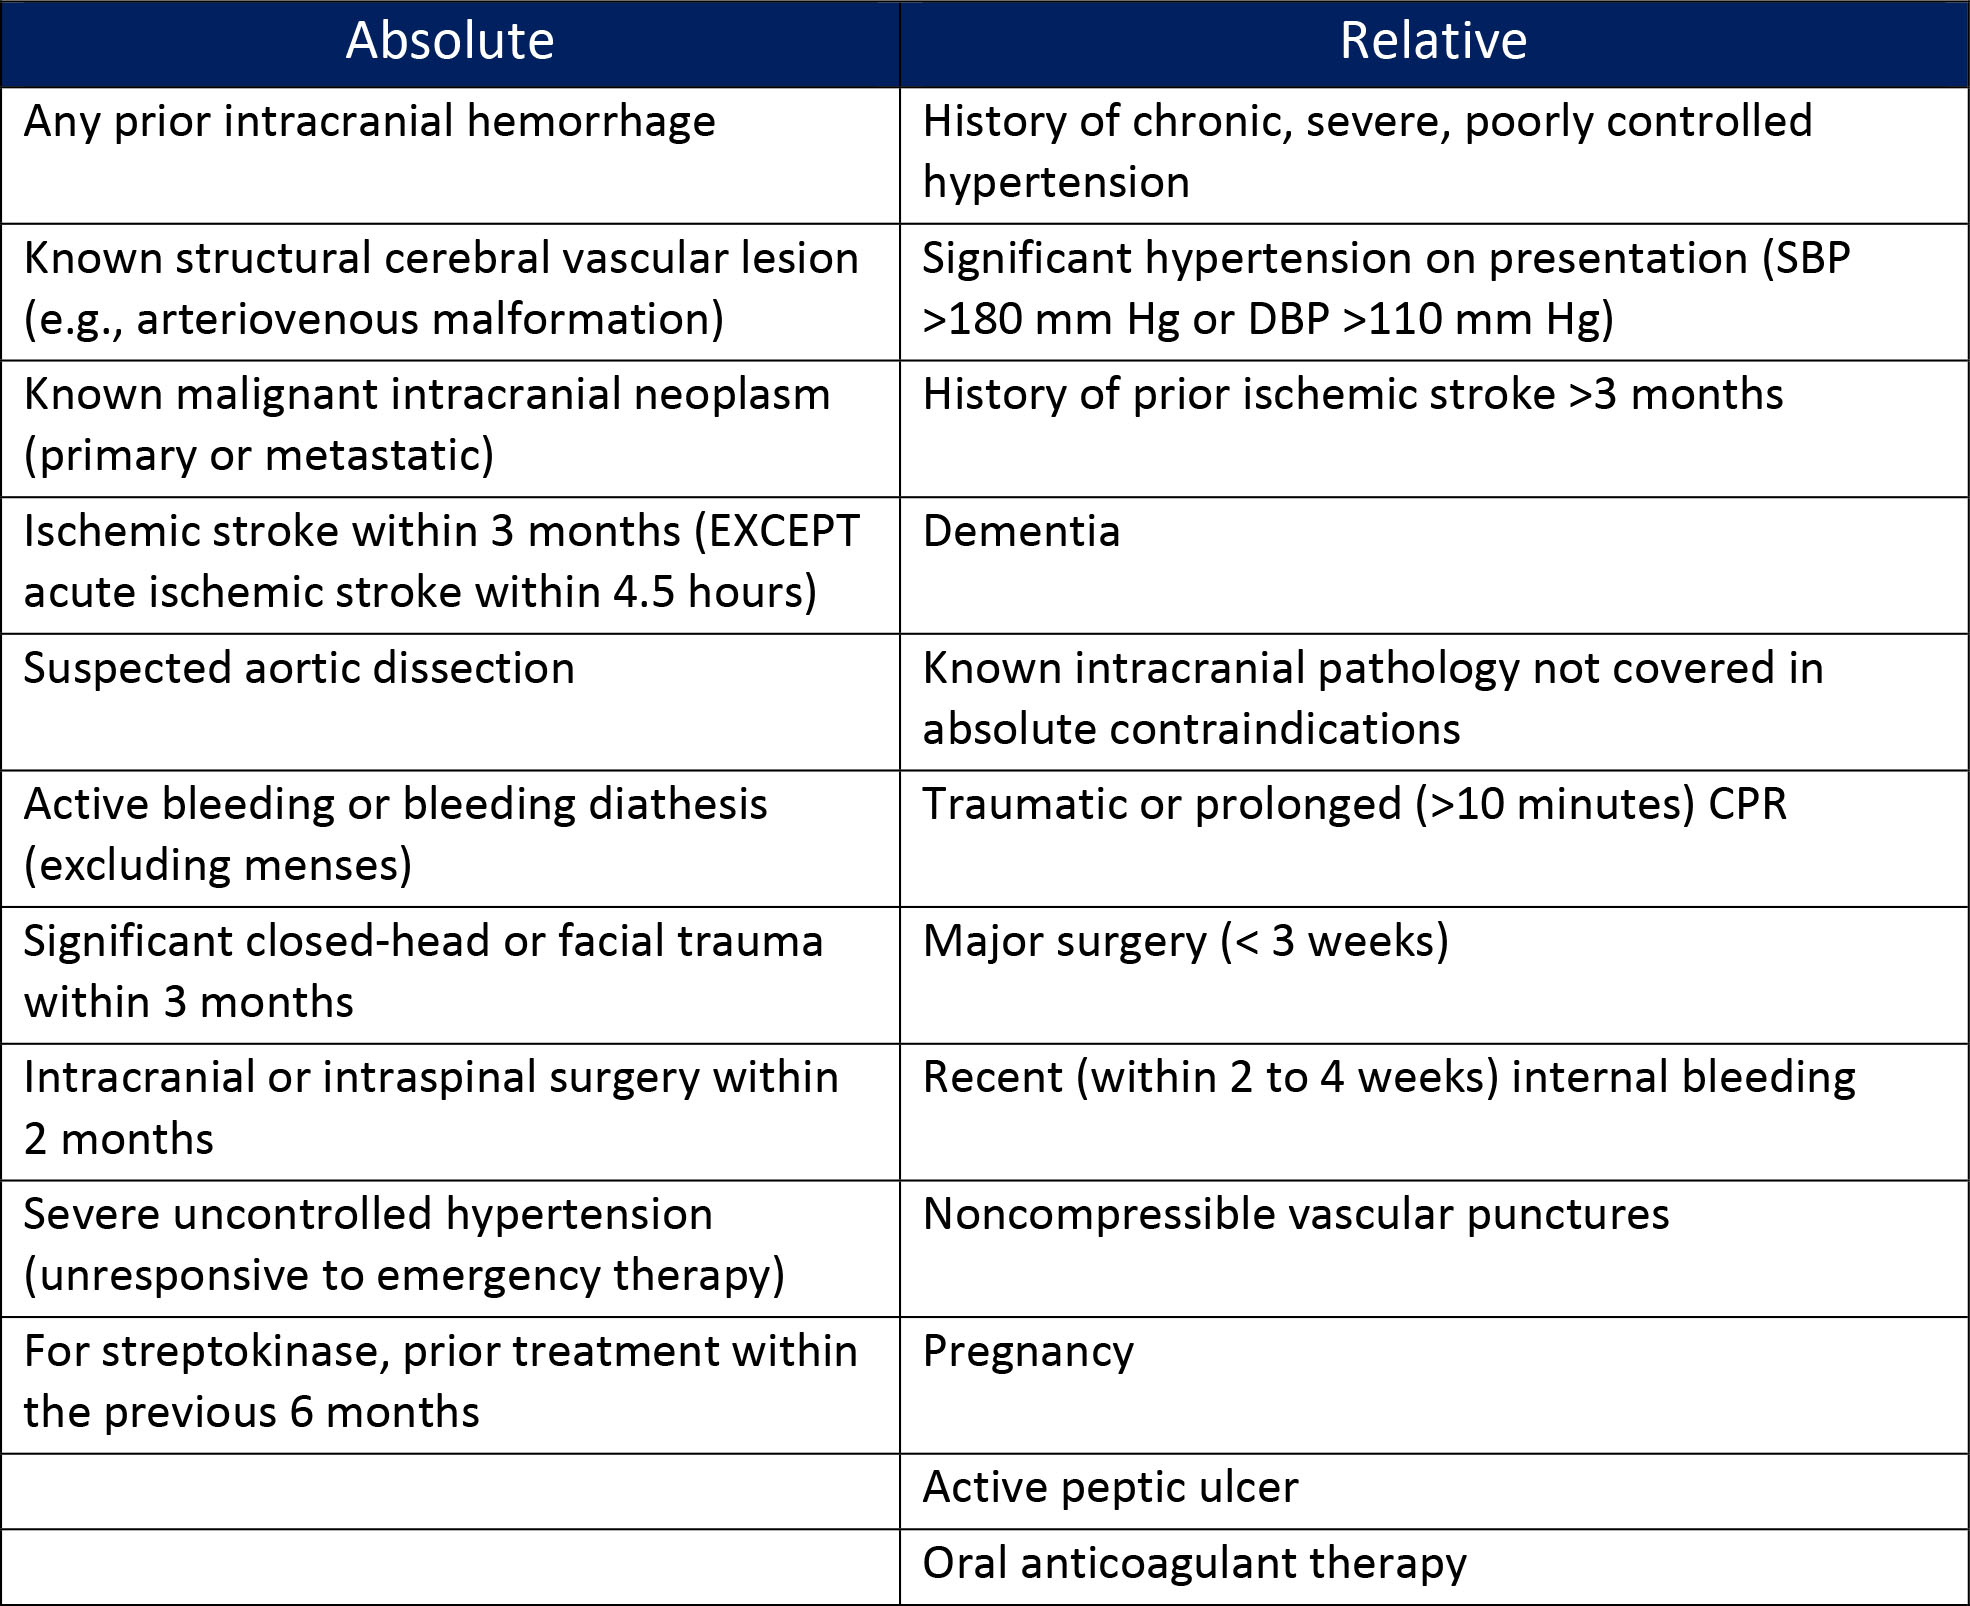 Absolute and Relative Contraindications in STEMI